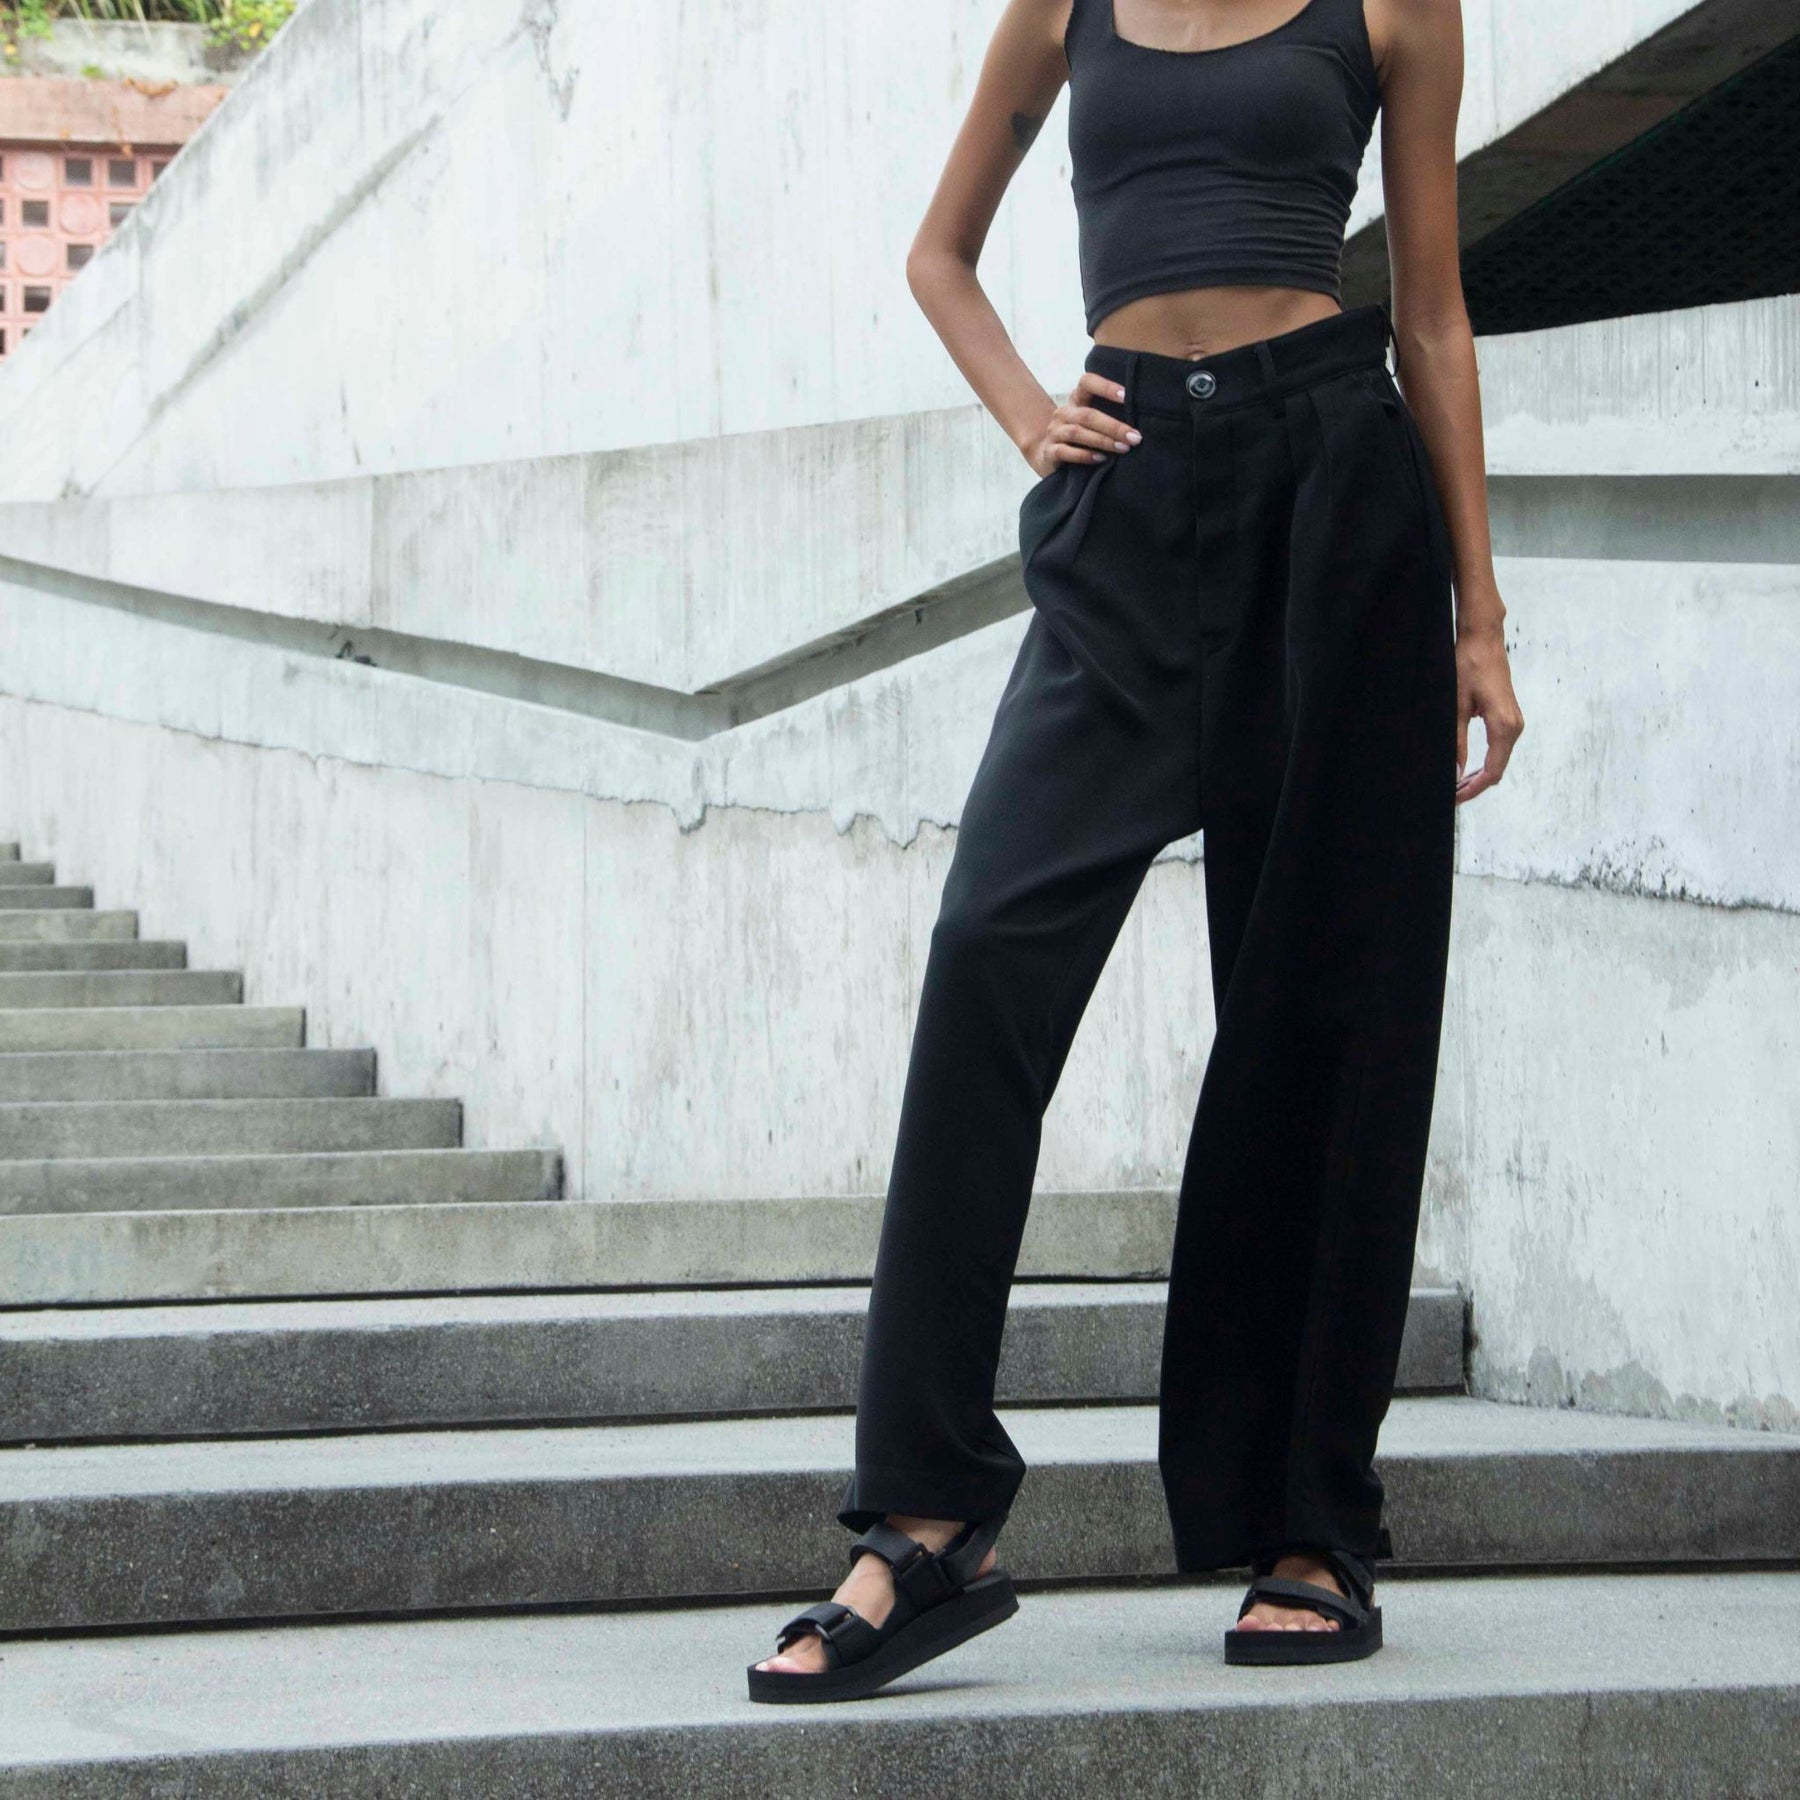 Woman wearing black trousers and black crop top and black adventure sandals standing on concrete steps